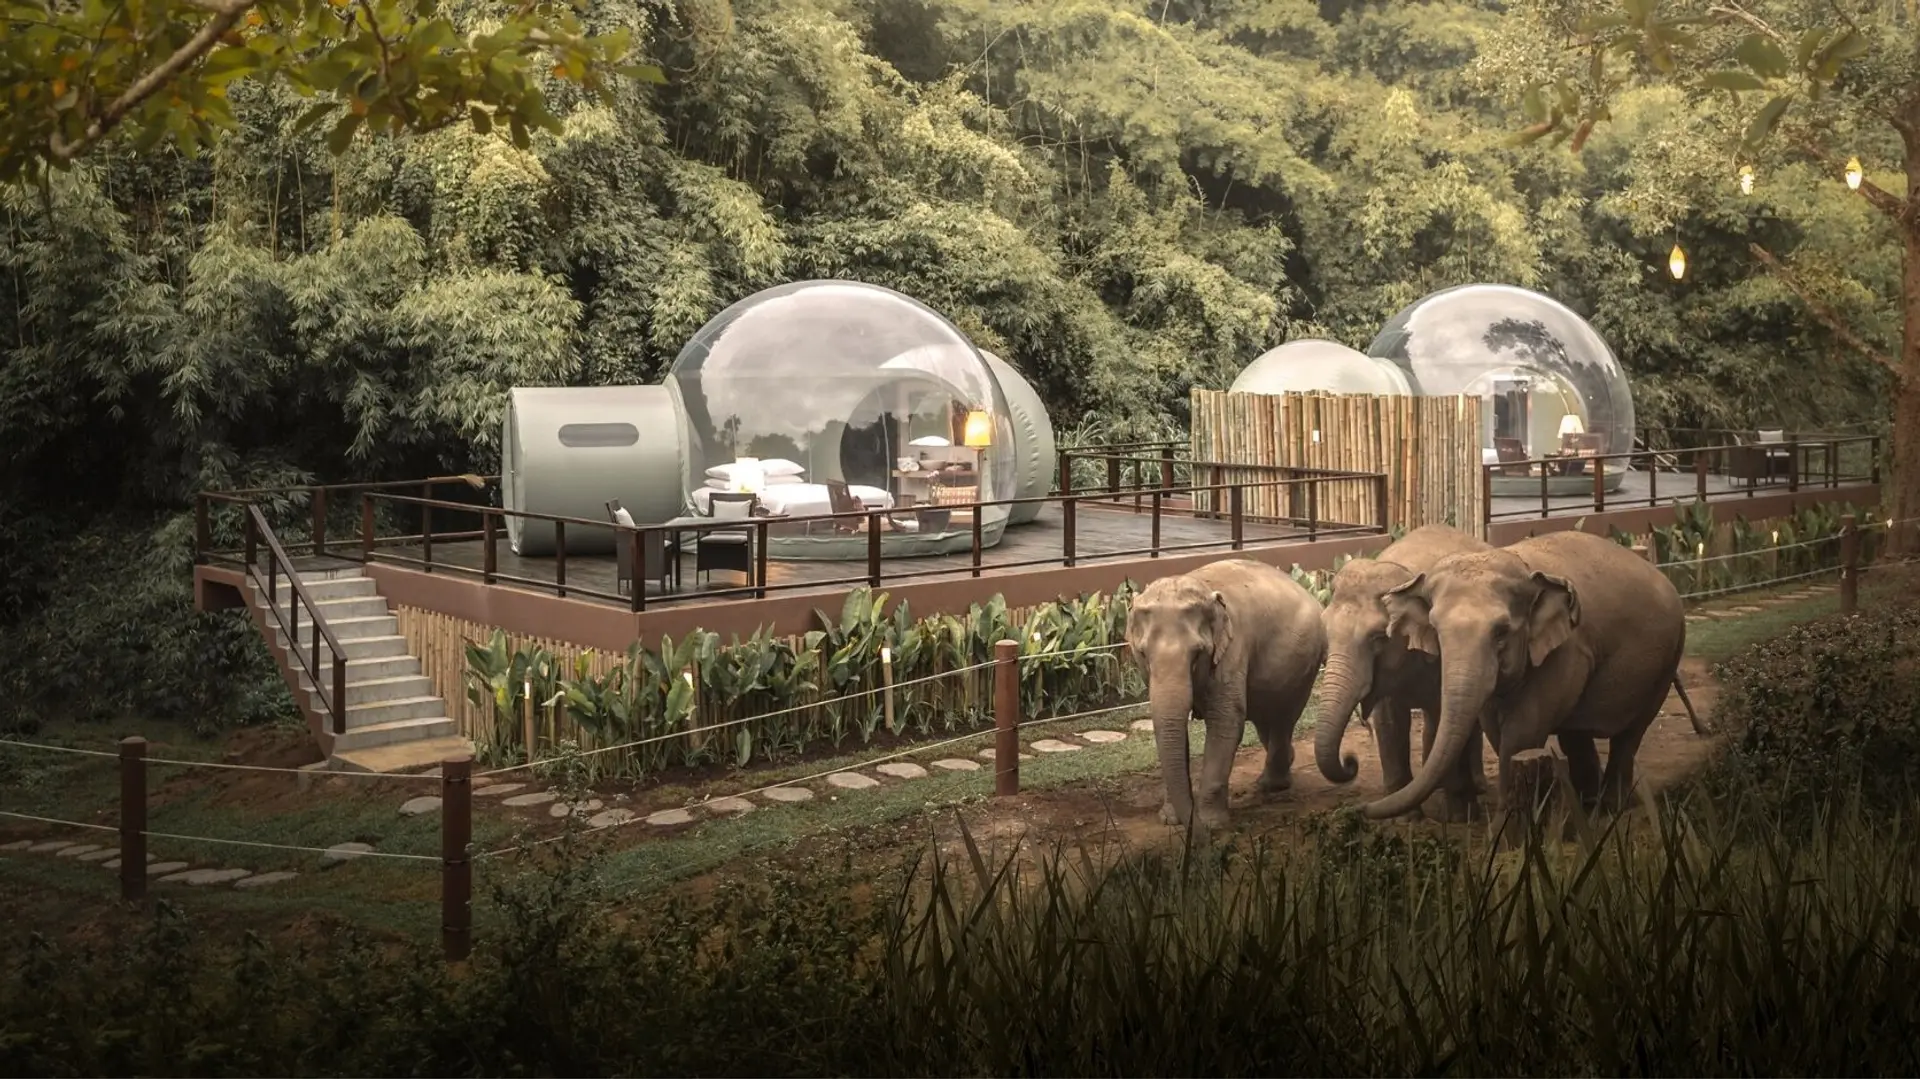 Hotels Articles - Anantara offers a unique virtual educational field trip